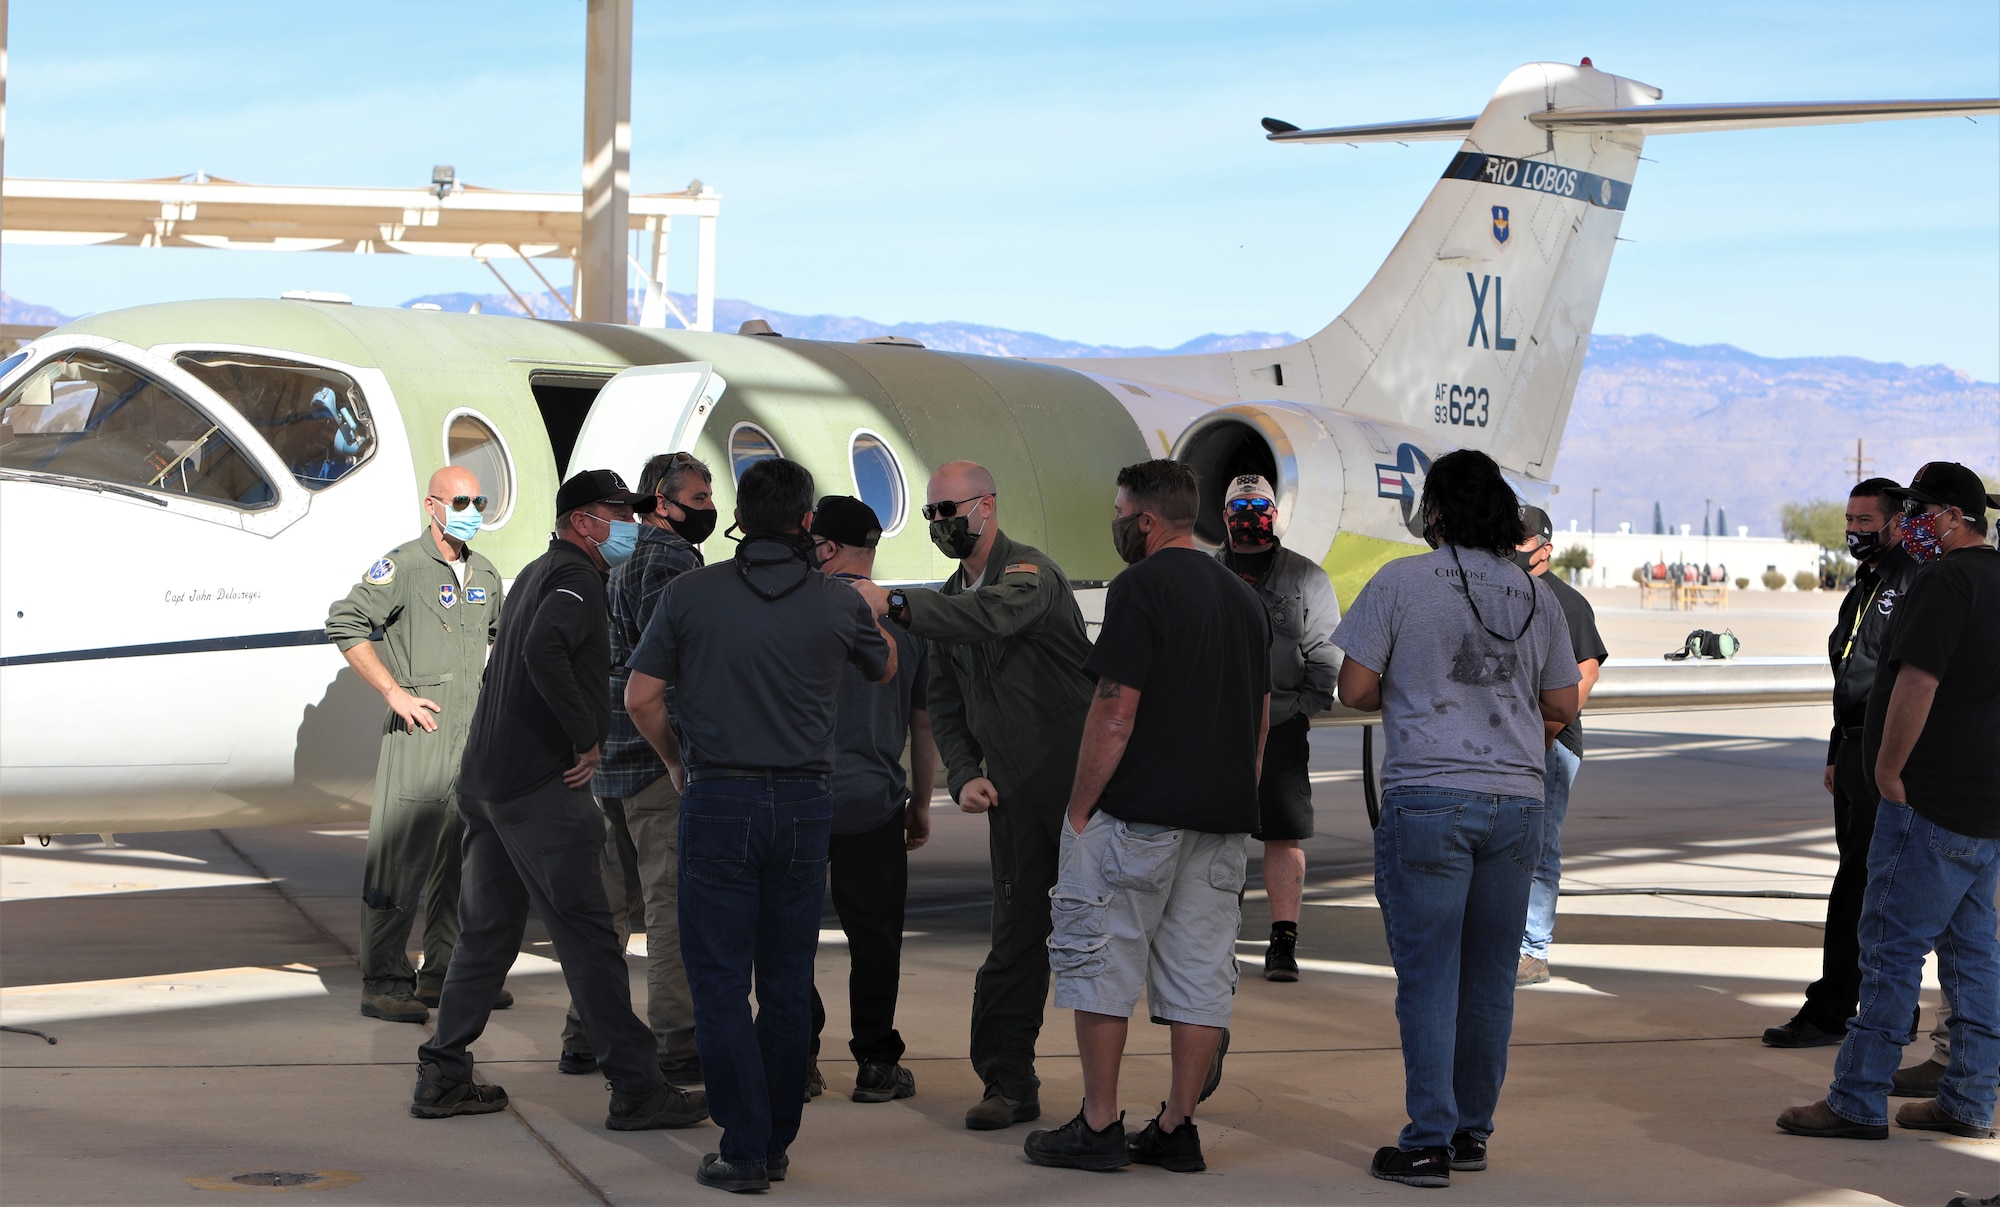 The T-1A Jayhawk maintenance team at the 309th Aerospace Maintenance and Regeneration Group at Davis-Monthan Air Force Base, Ariz., bids farewell to the flight crew.